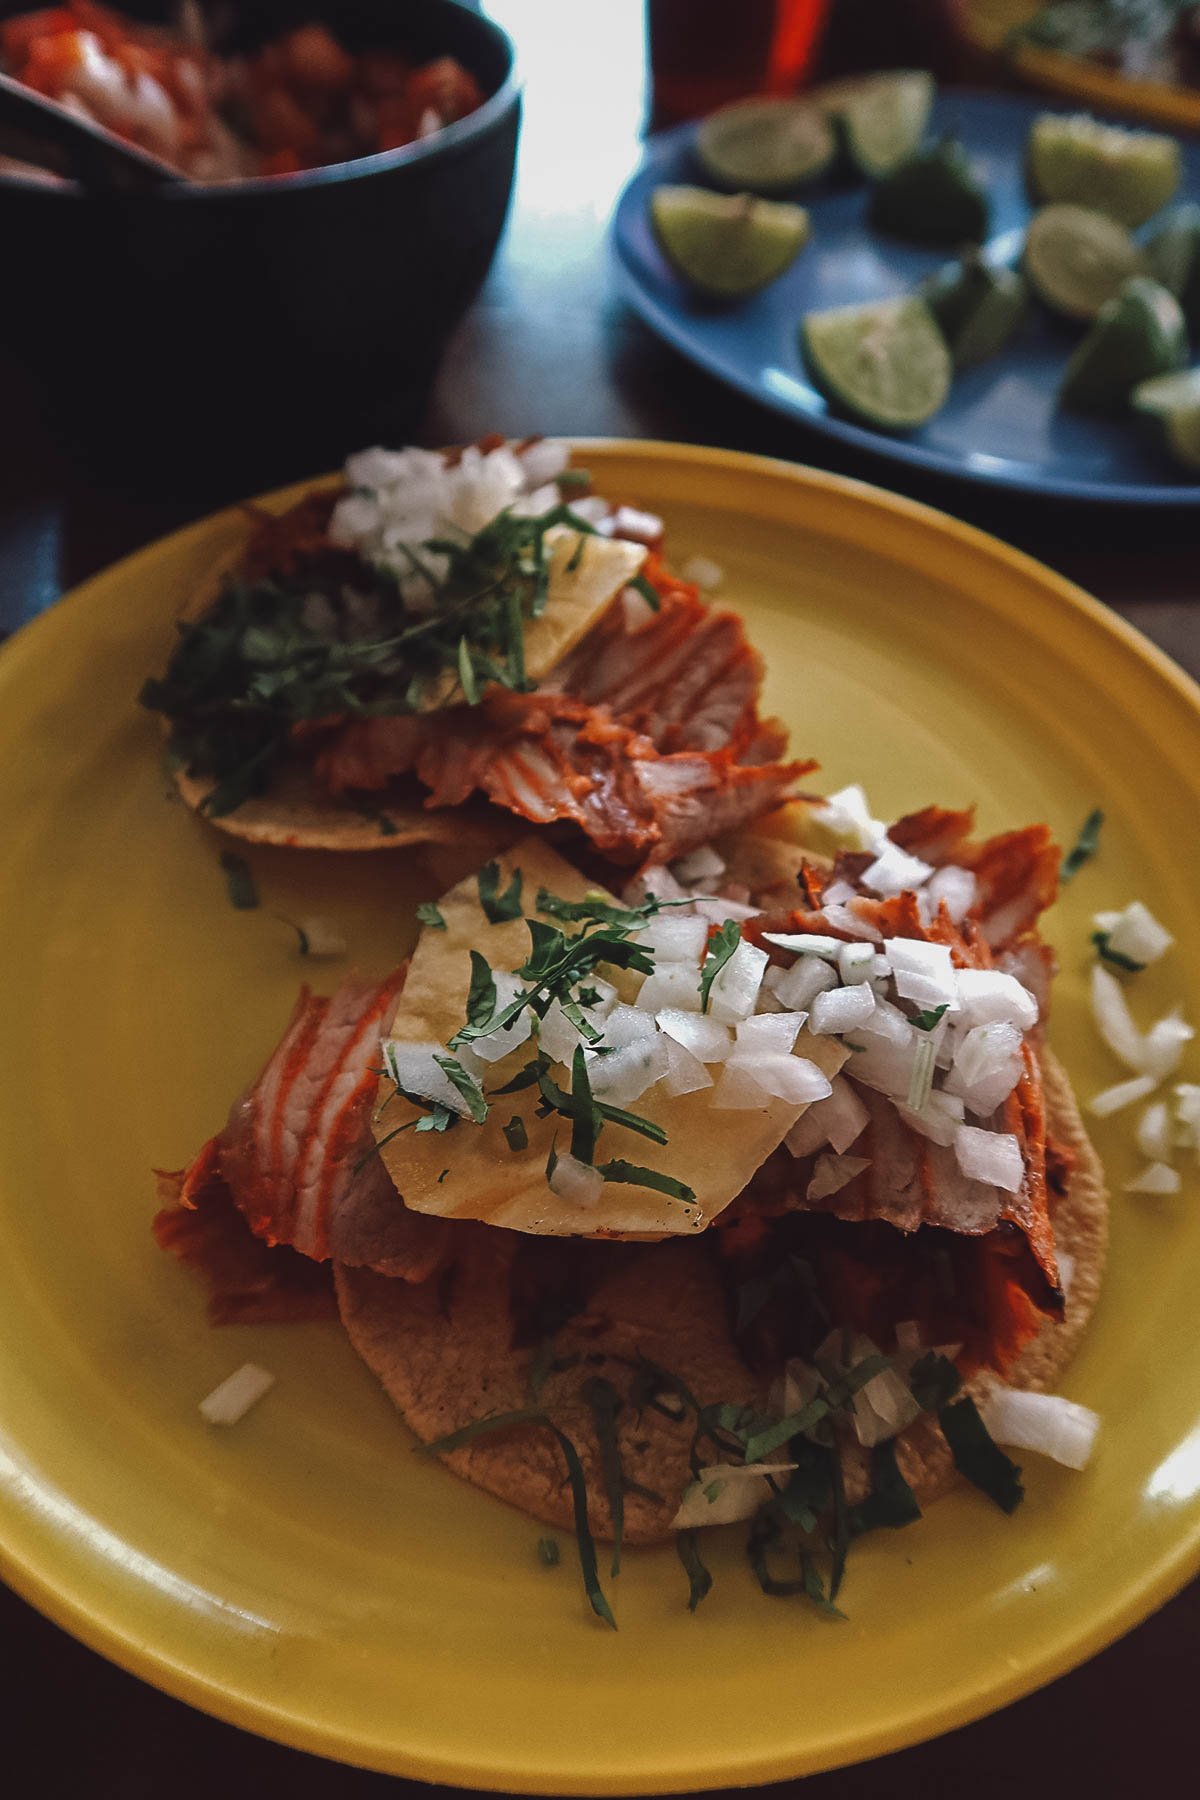 Plate of pastor tacos